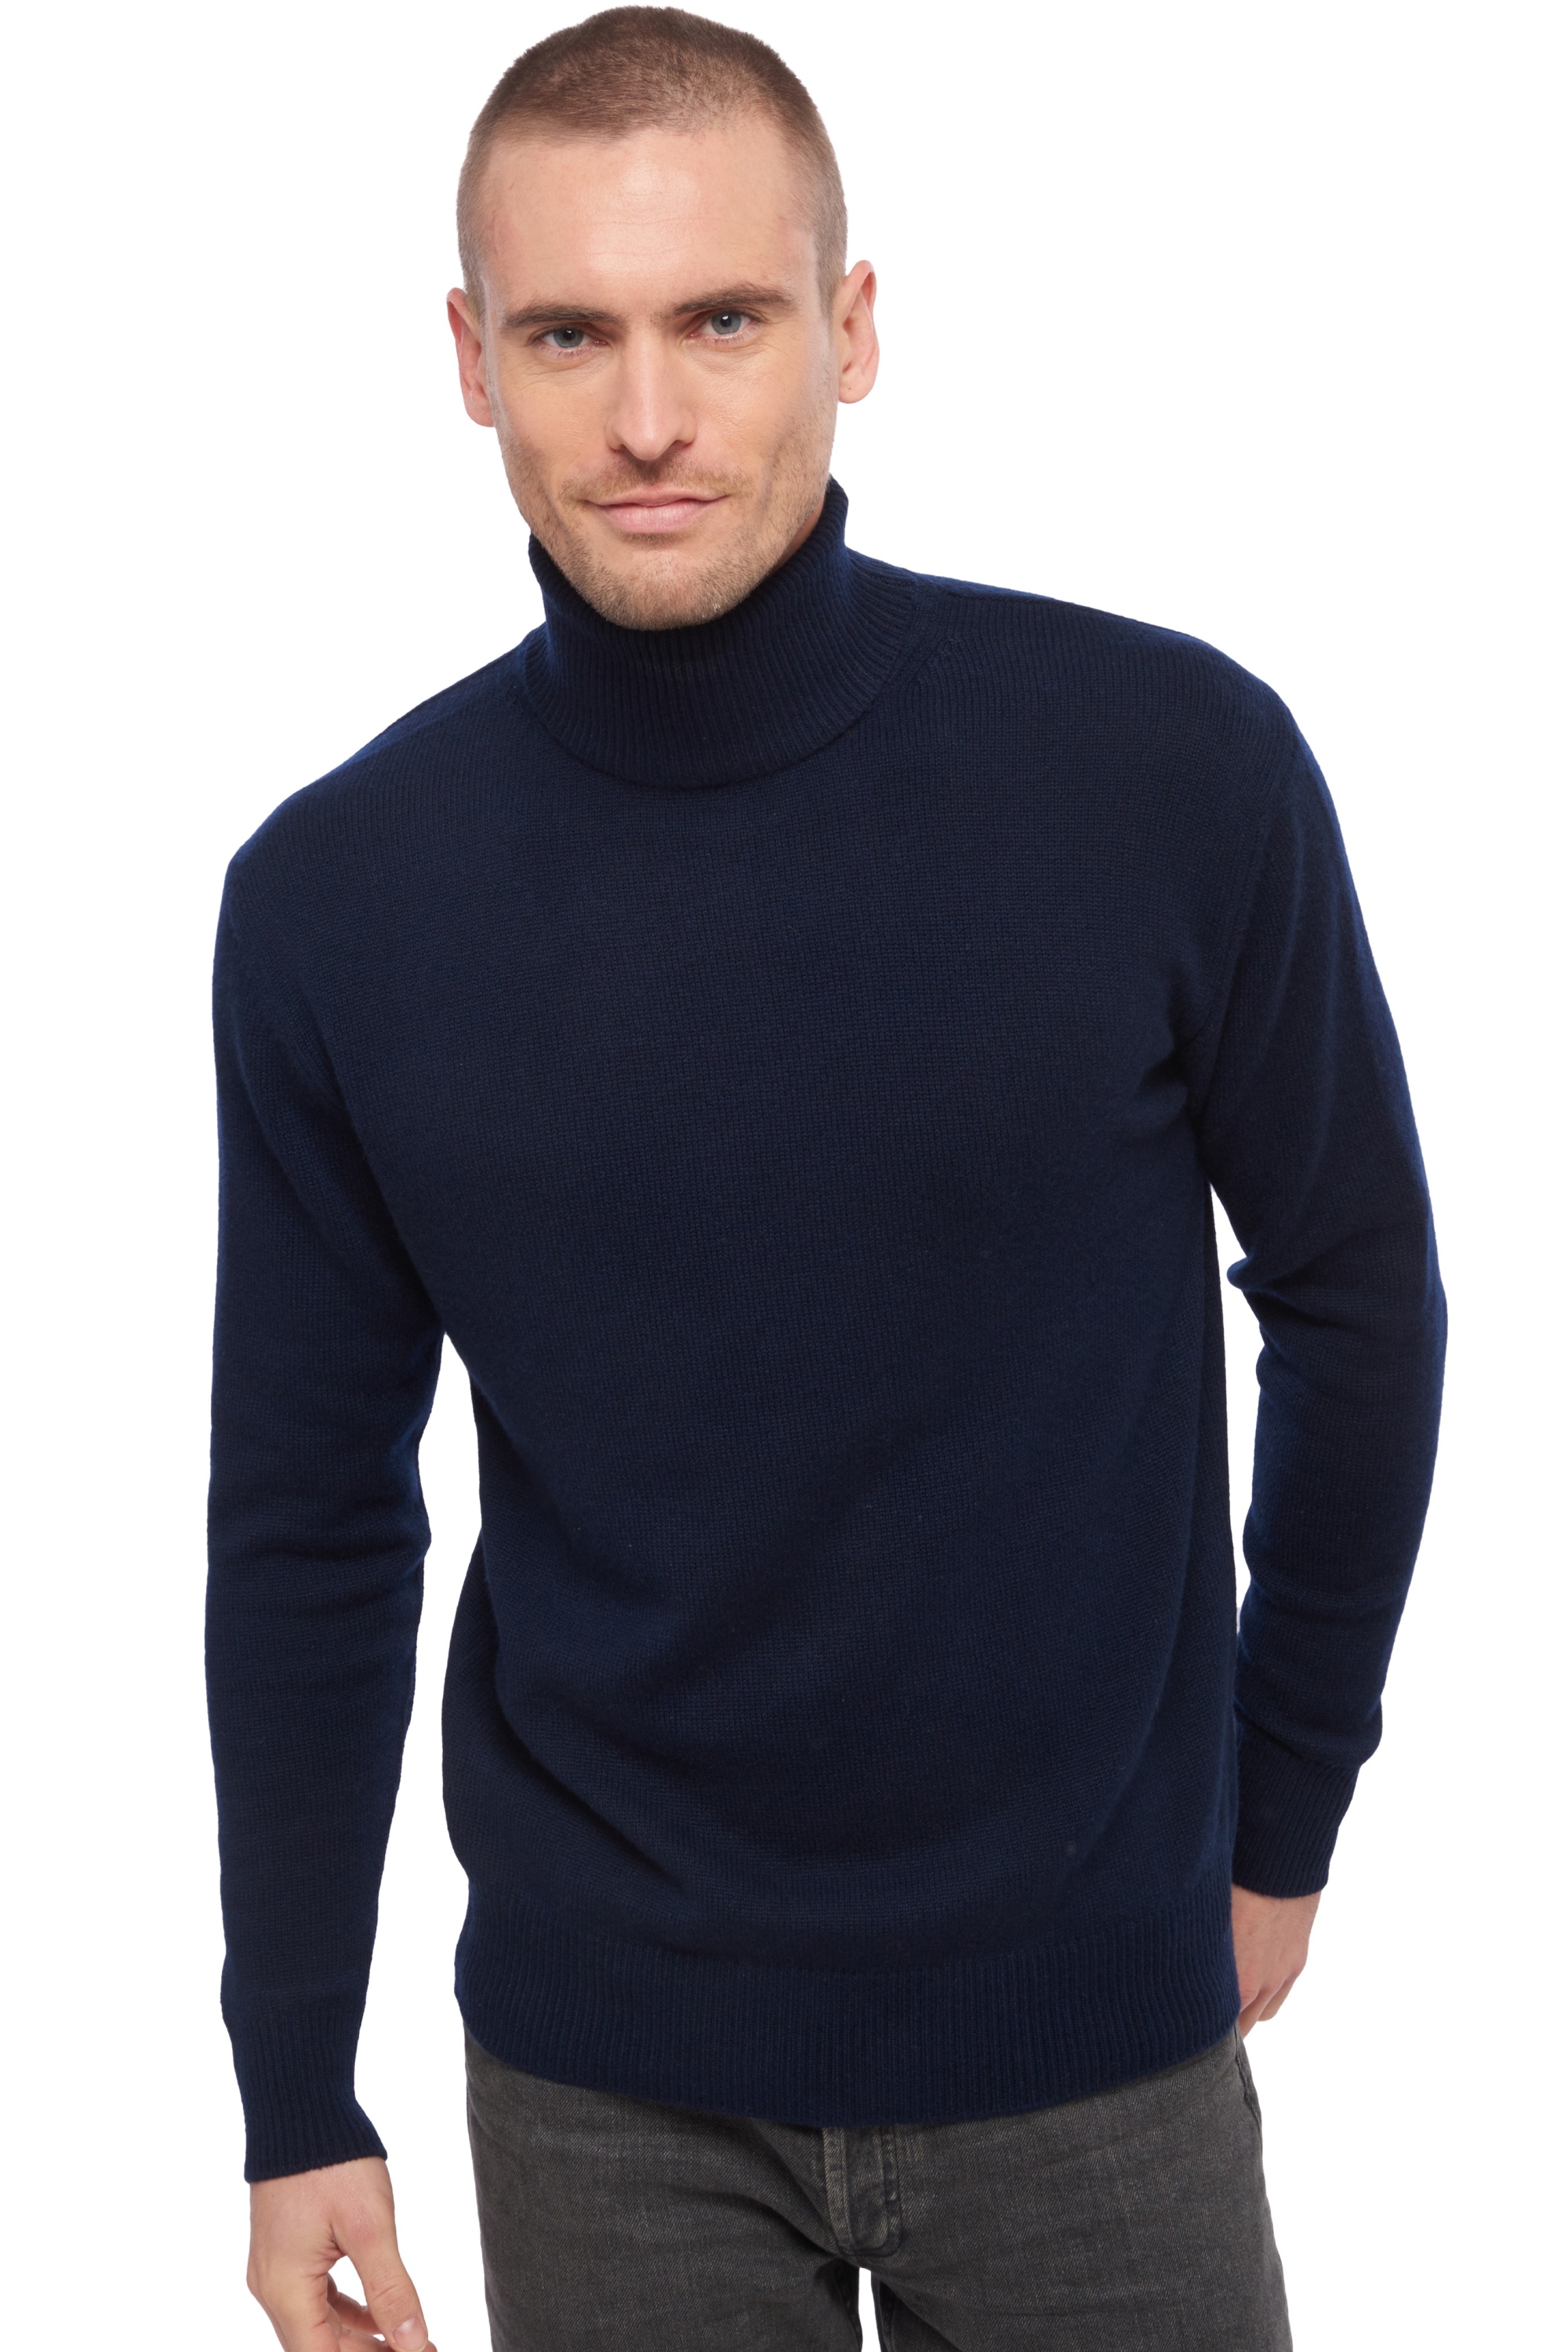 Cachemire pull homme col roule edgar 4f marine fonce 3xl